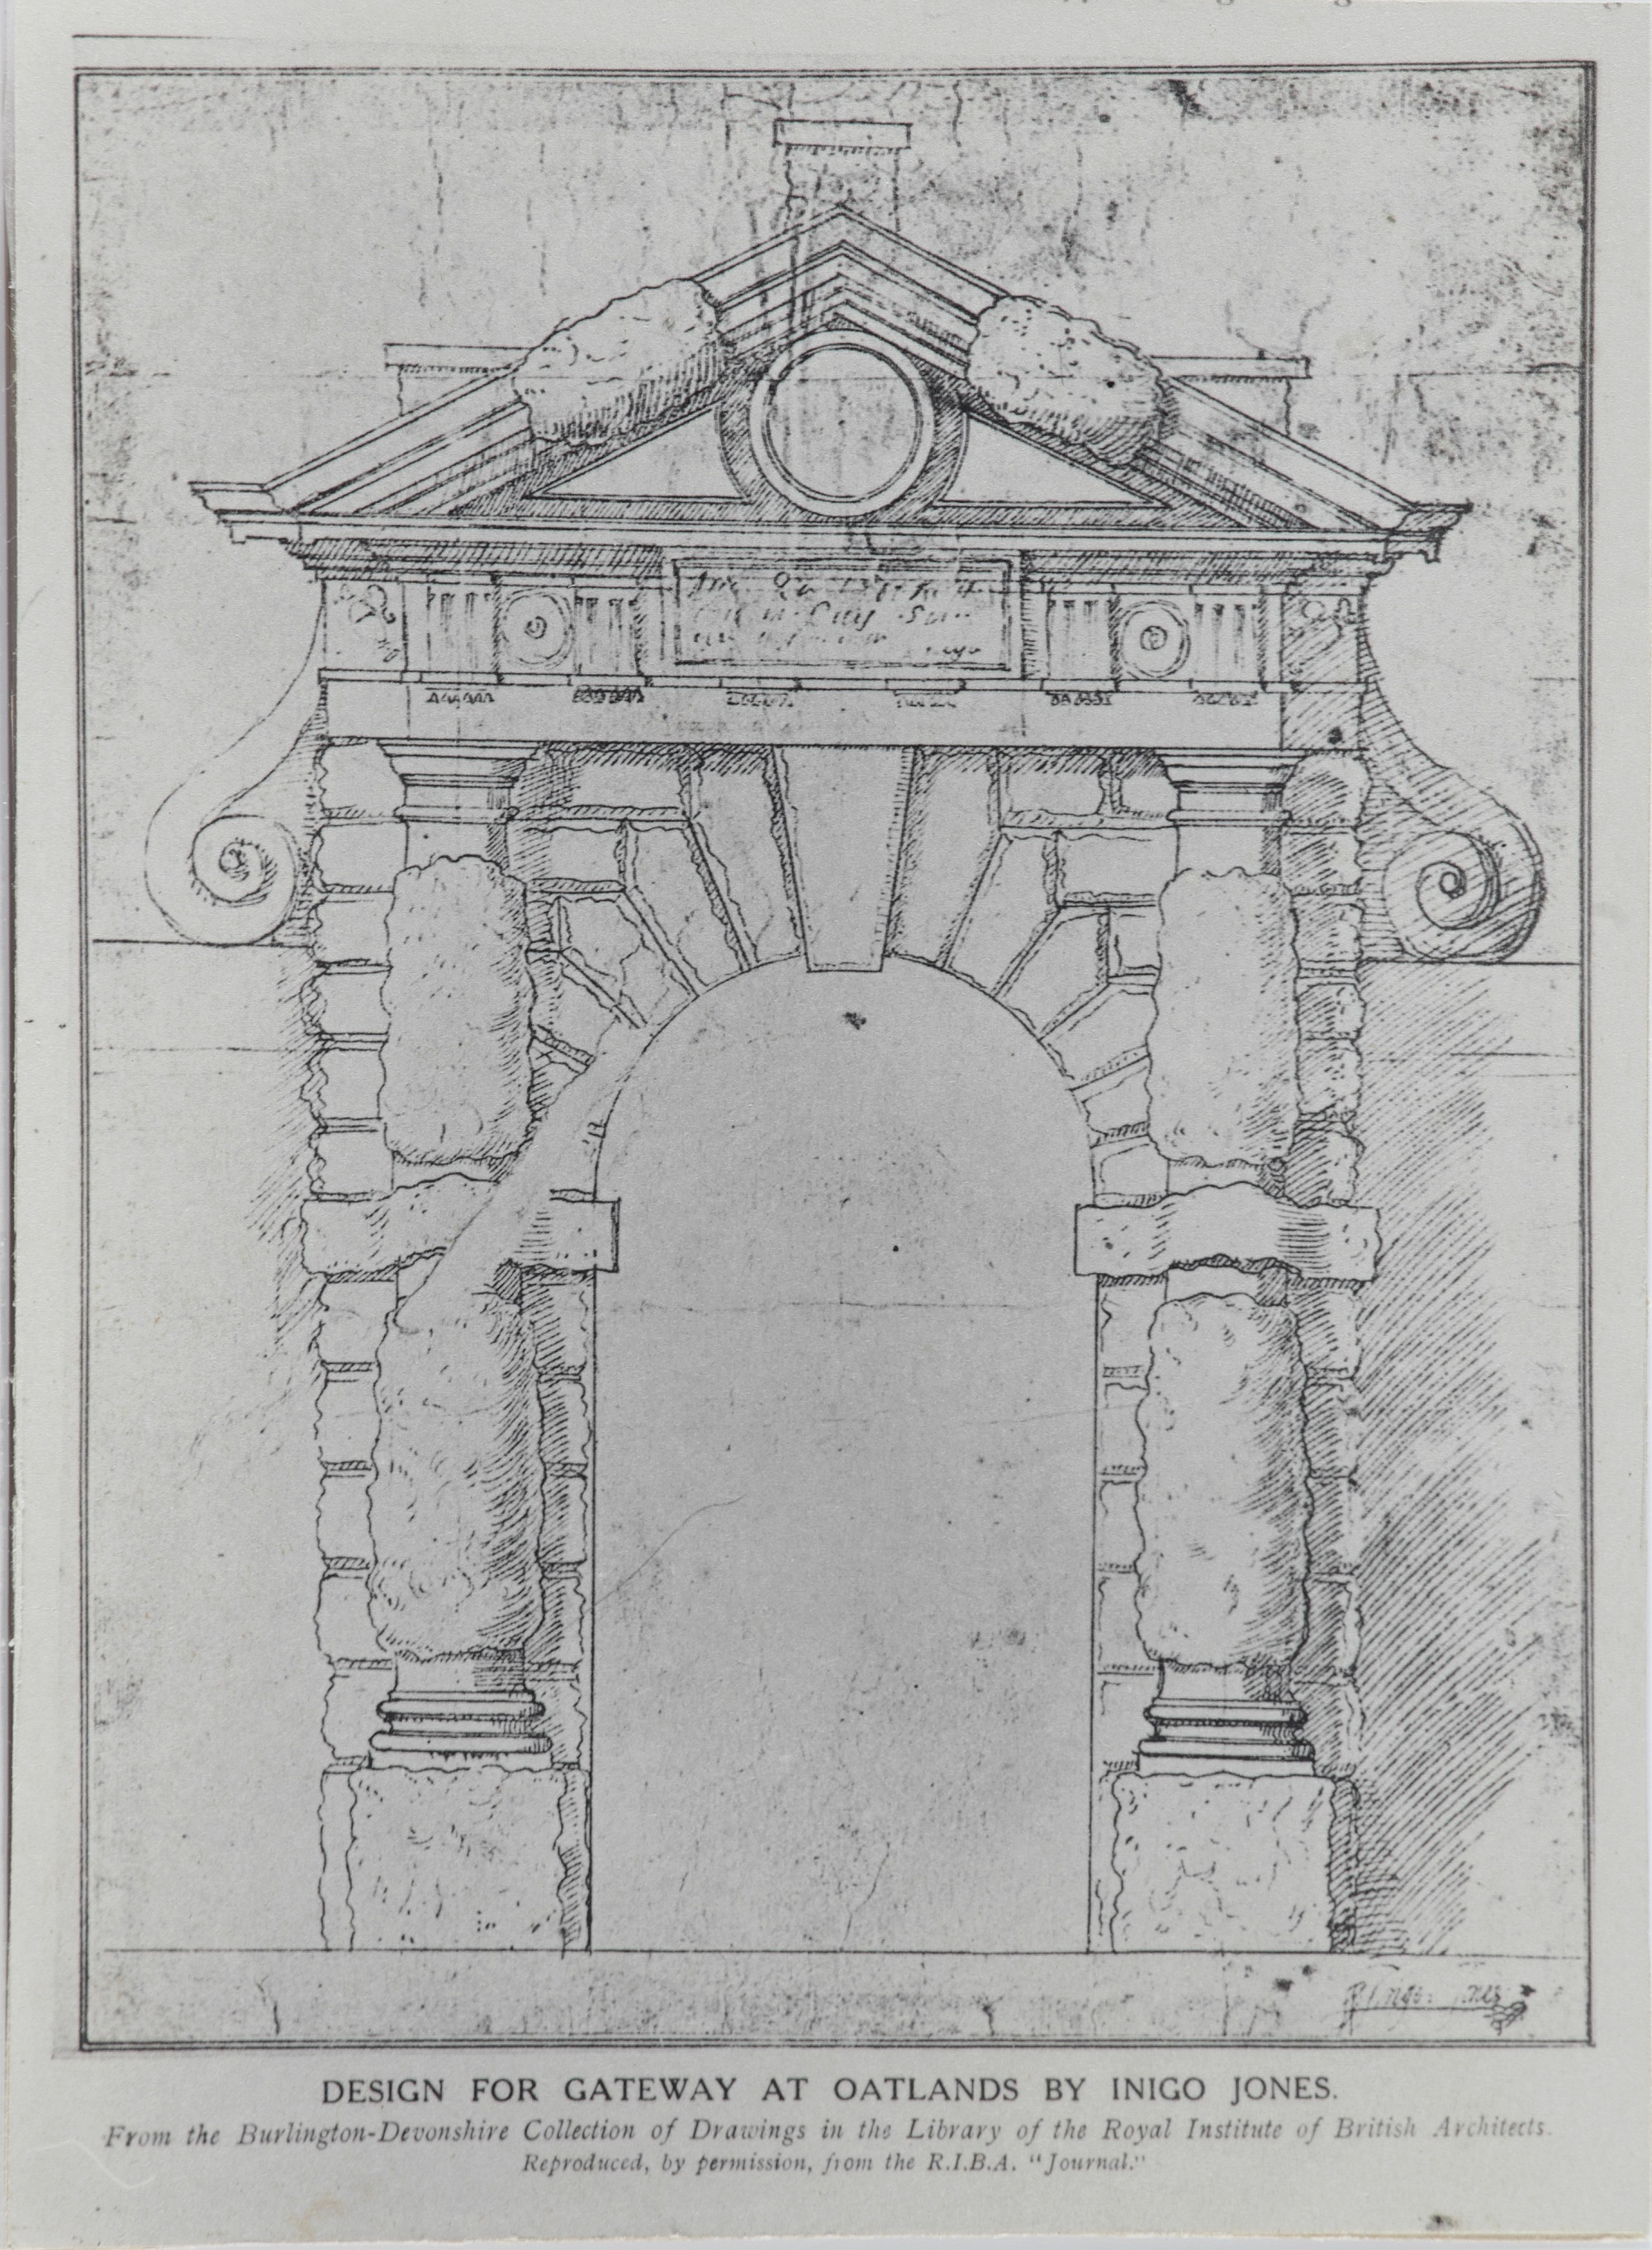 Black and white print on card of a drawing for a 'Design for a Gateway at Oatlands by Inigo Jones'.